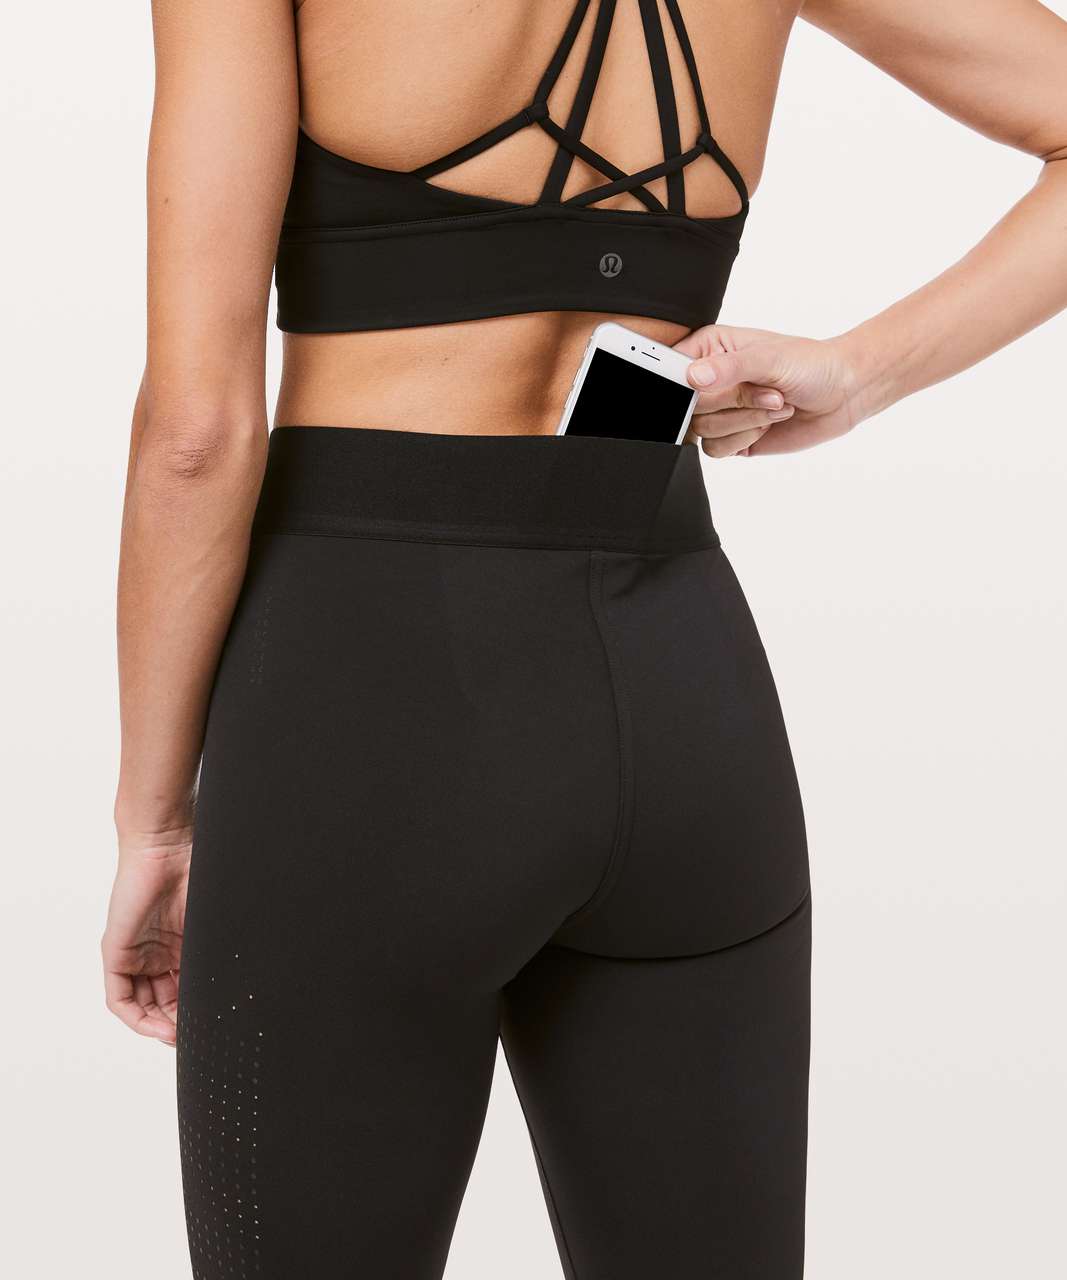 SoulCycle by Lululemon Shop Holiday Deals on Womens Pants